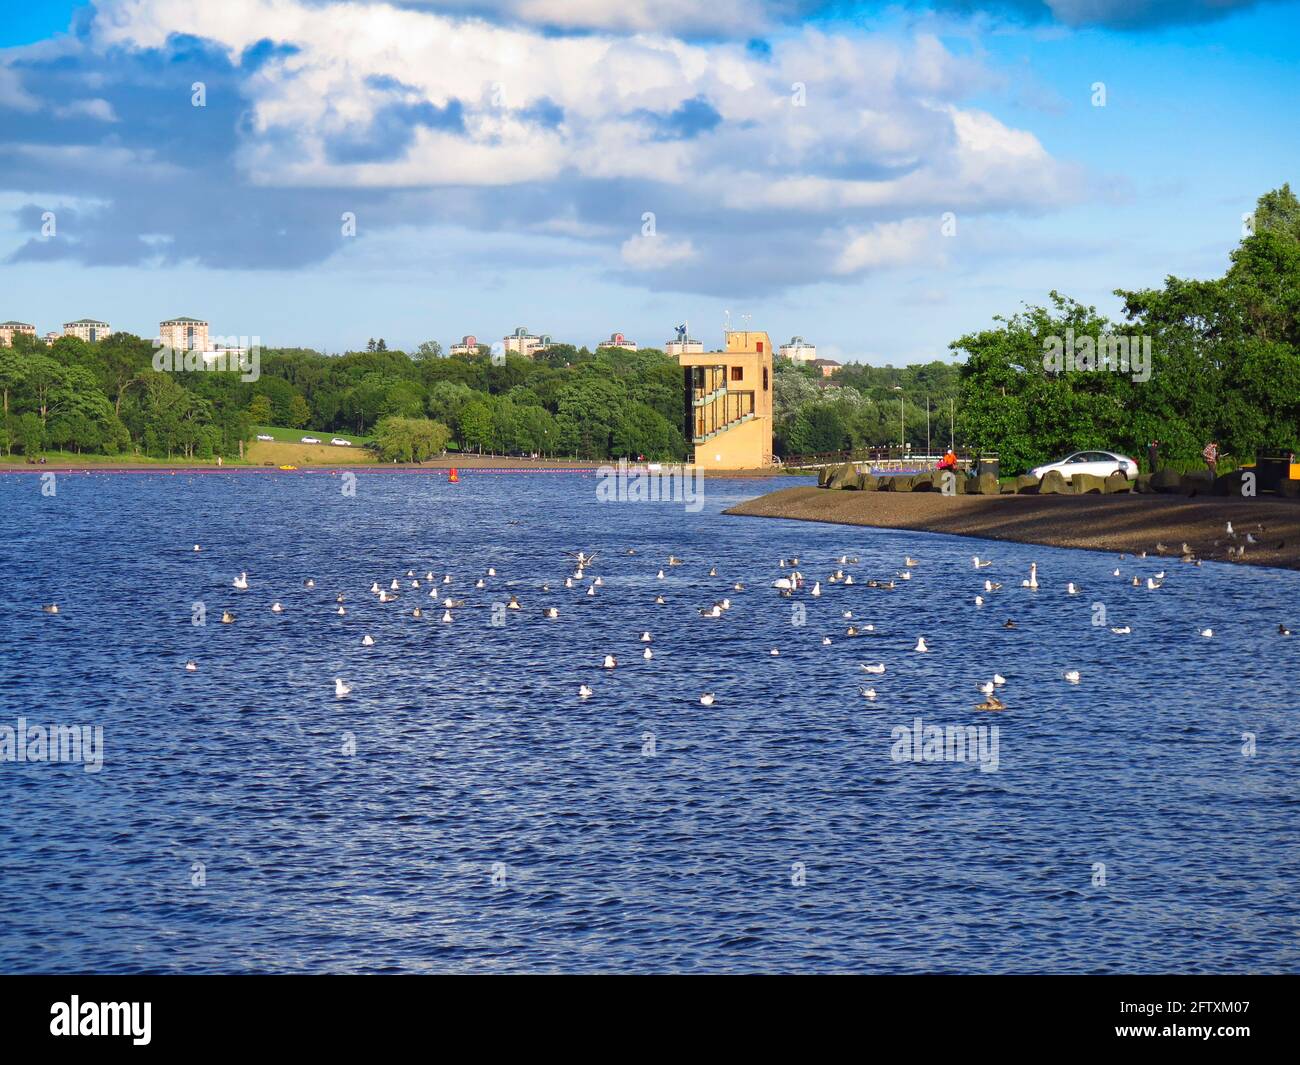 National Rowing Center Strathclyde Park torre di osservazione Foto Stock